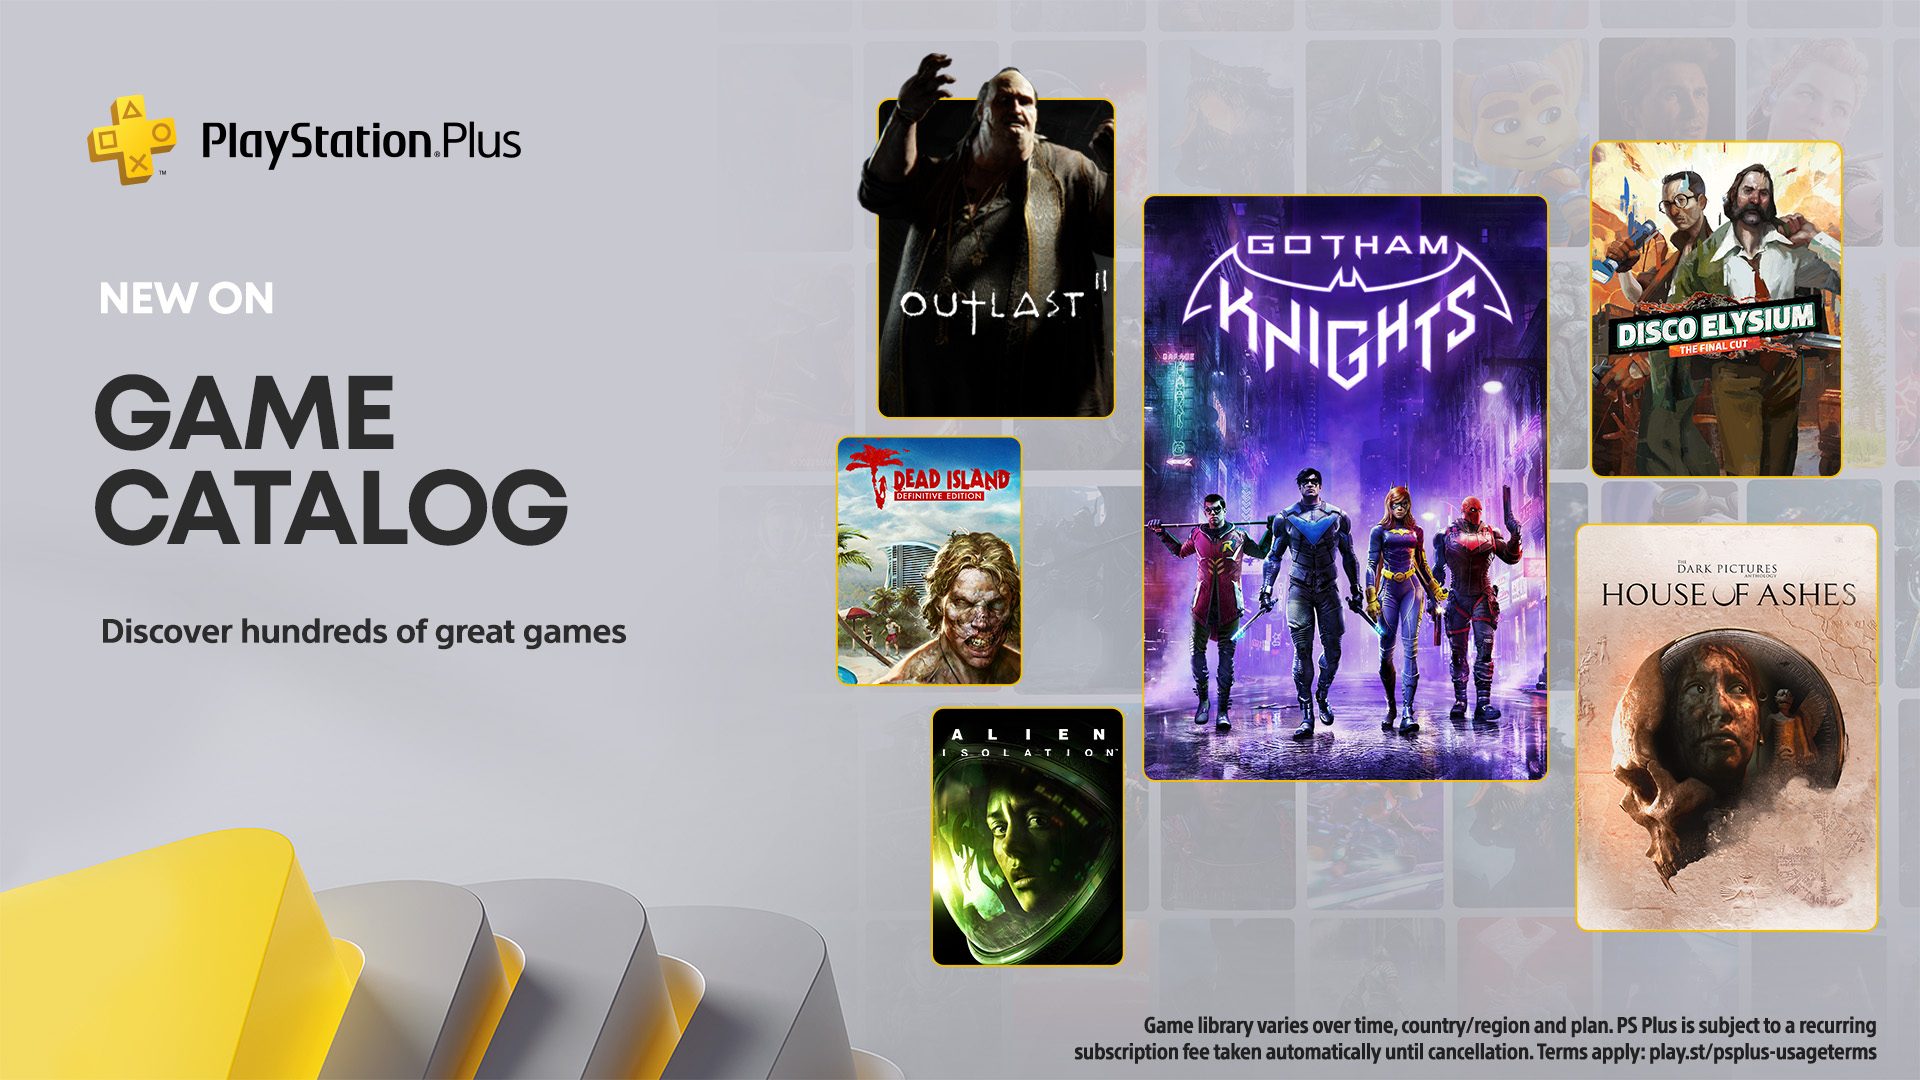 Xbox Game Pass launches a rival to PlayStation Plus